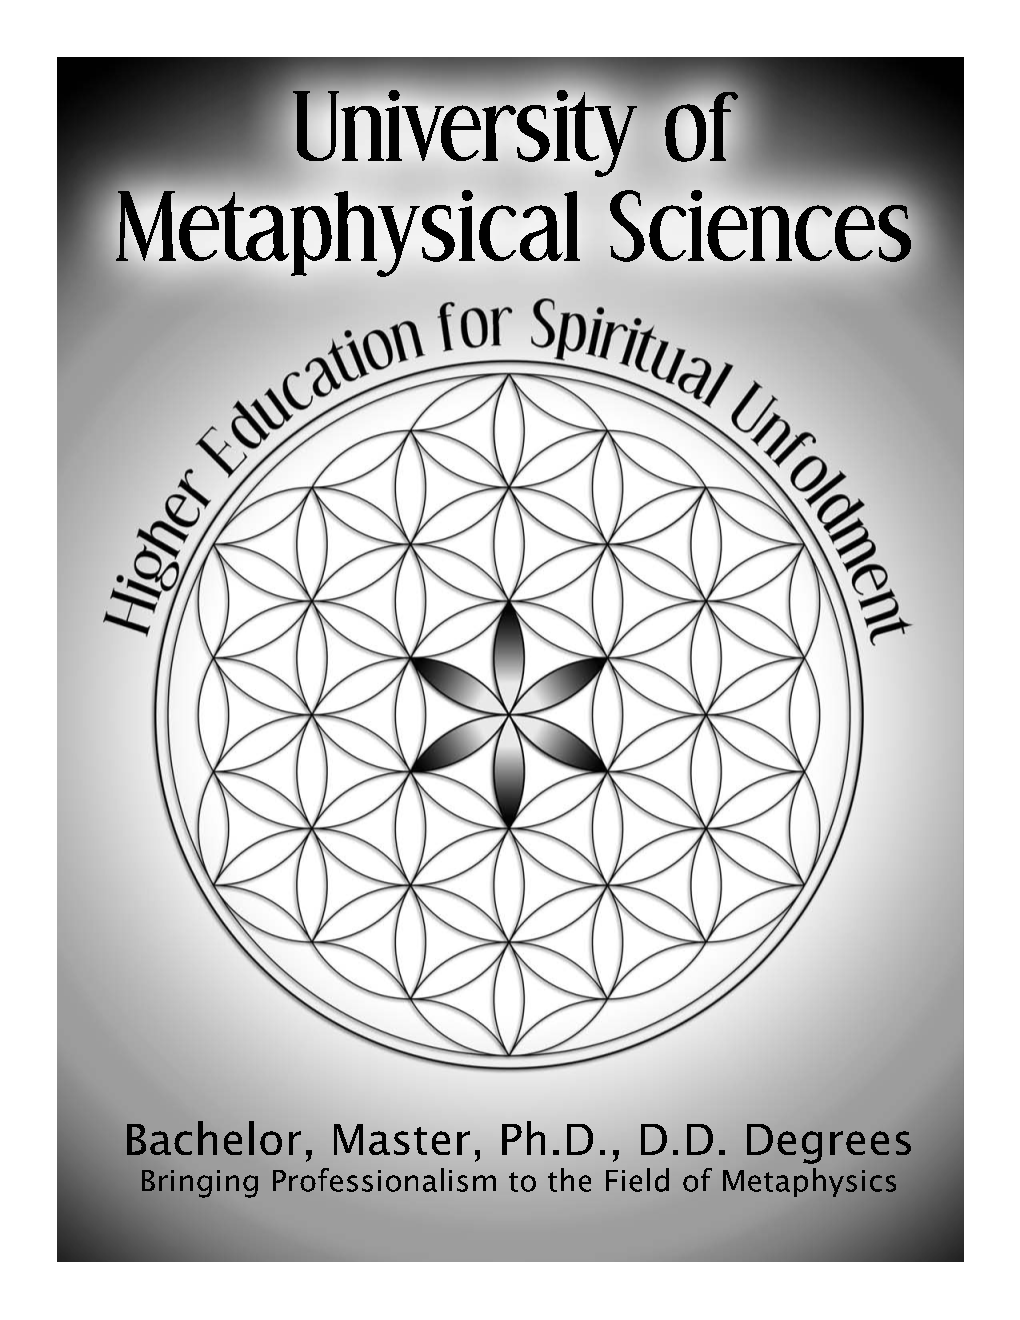 Earn Your Bachelors, Masters, Ph.D. Or DD in Metaphysics